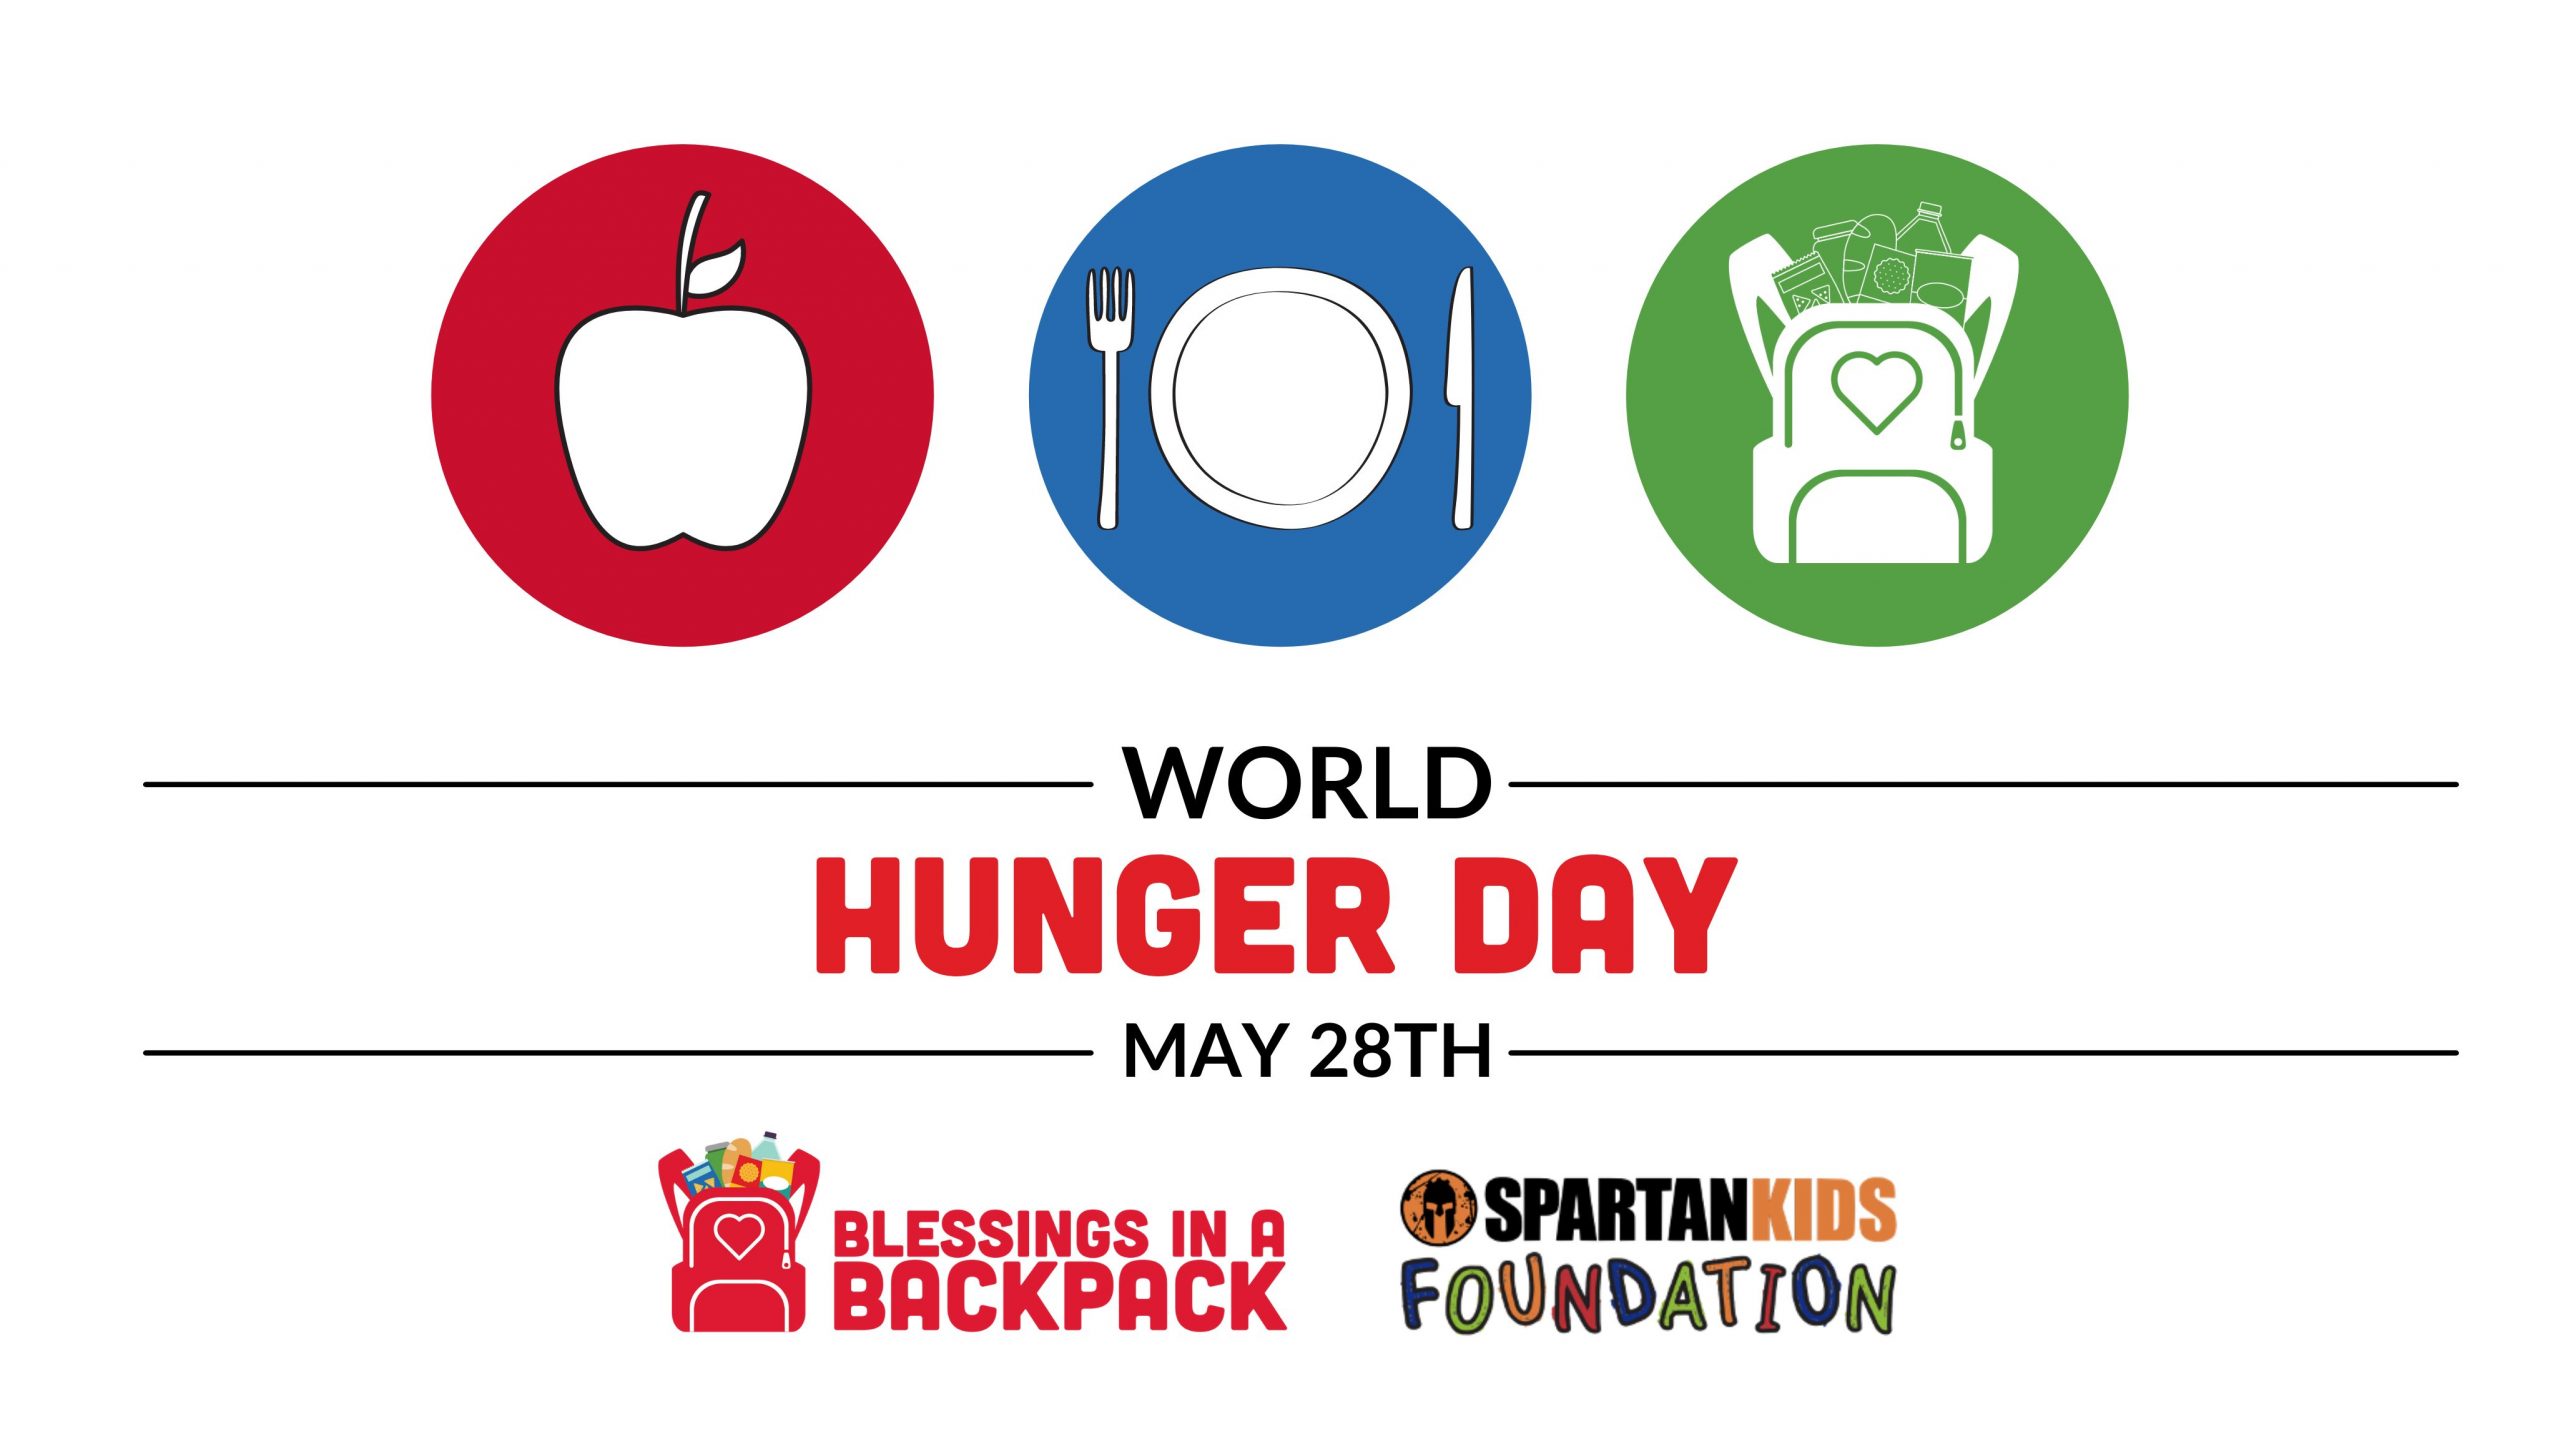 Spartan Kids Foundation Matching $3,000 in Blessings Orlando Donations on World Hunger Day